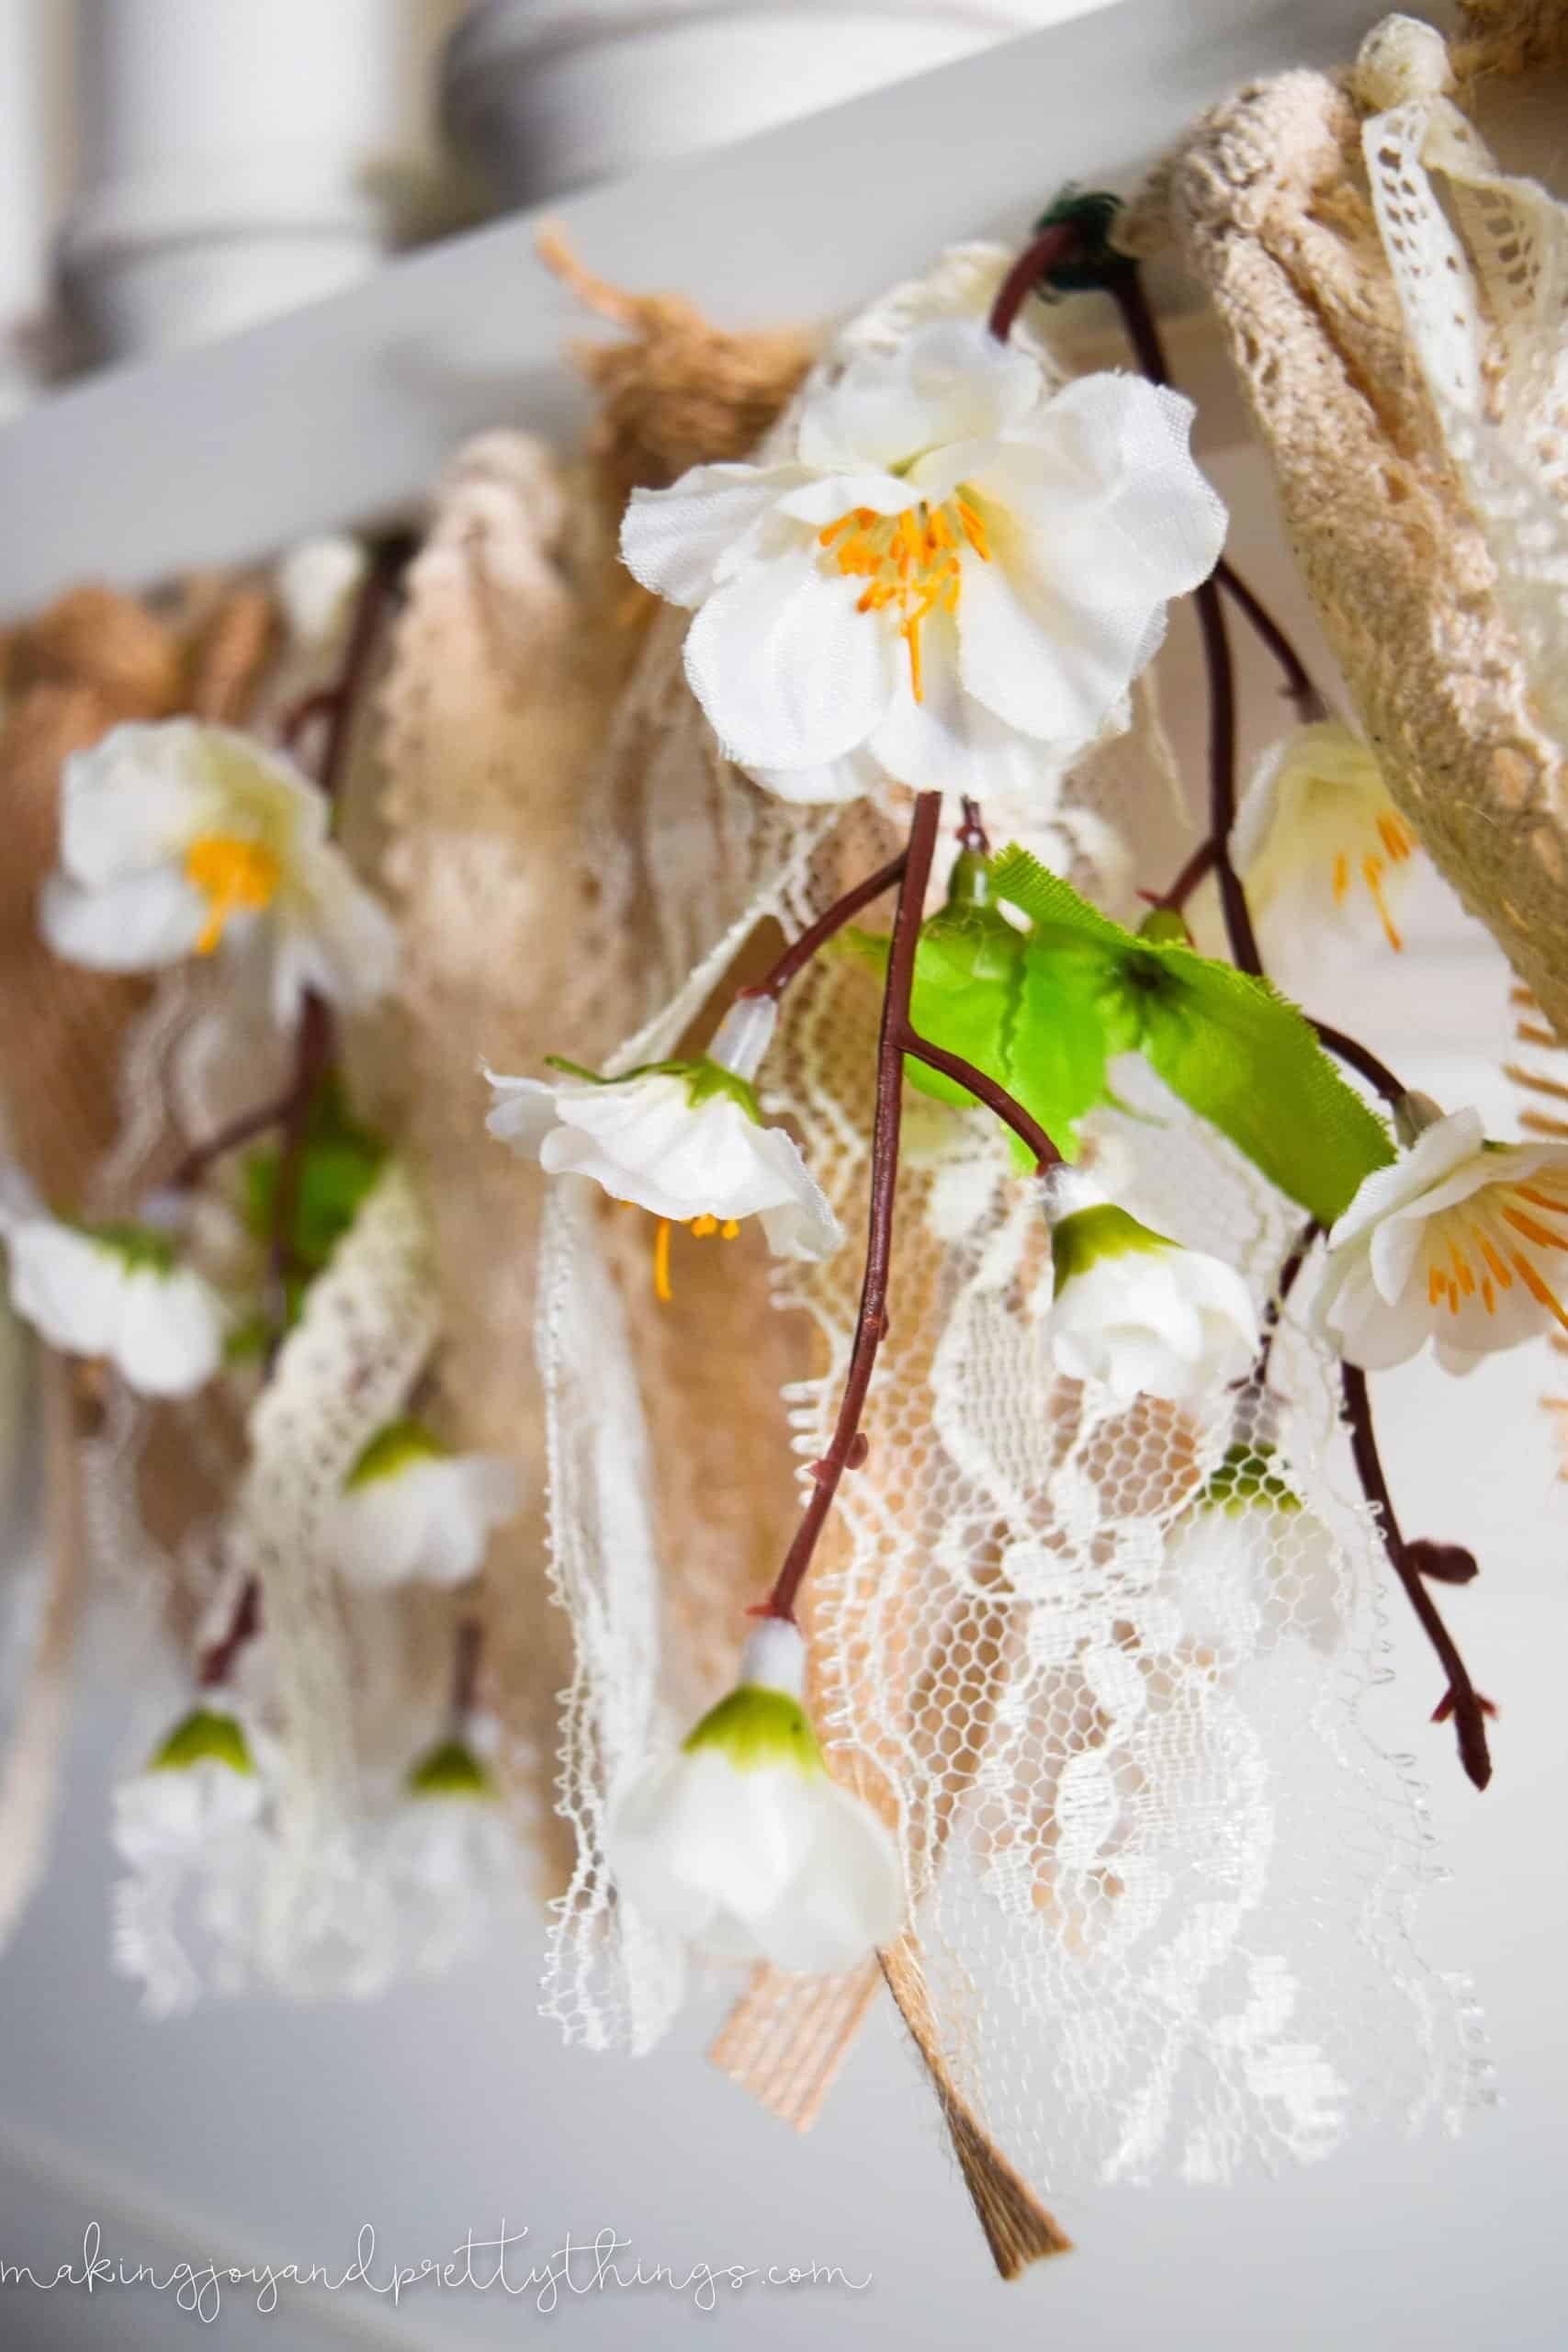 A closer look at the springs of faux peach blossom flowers on a lace garland.